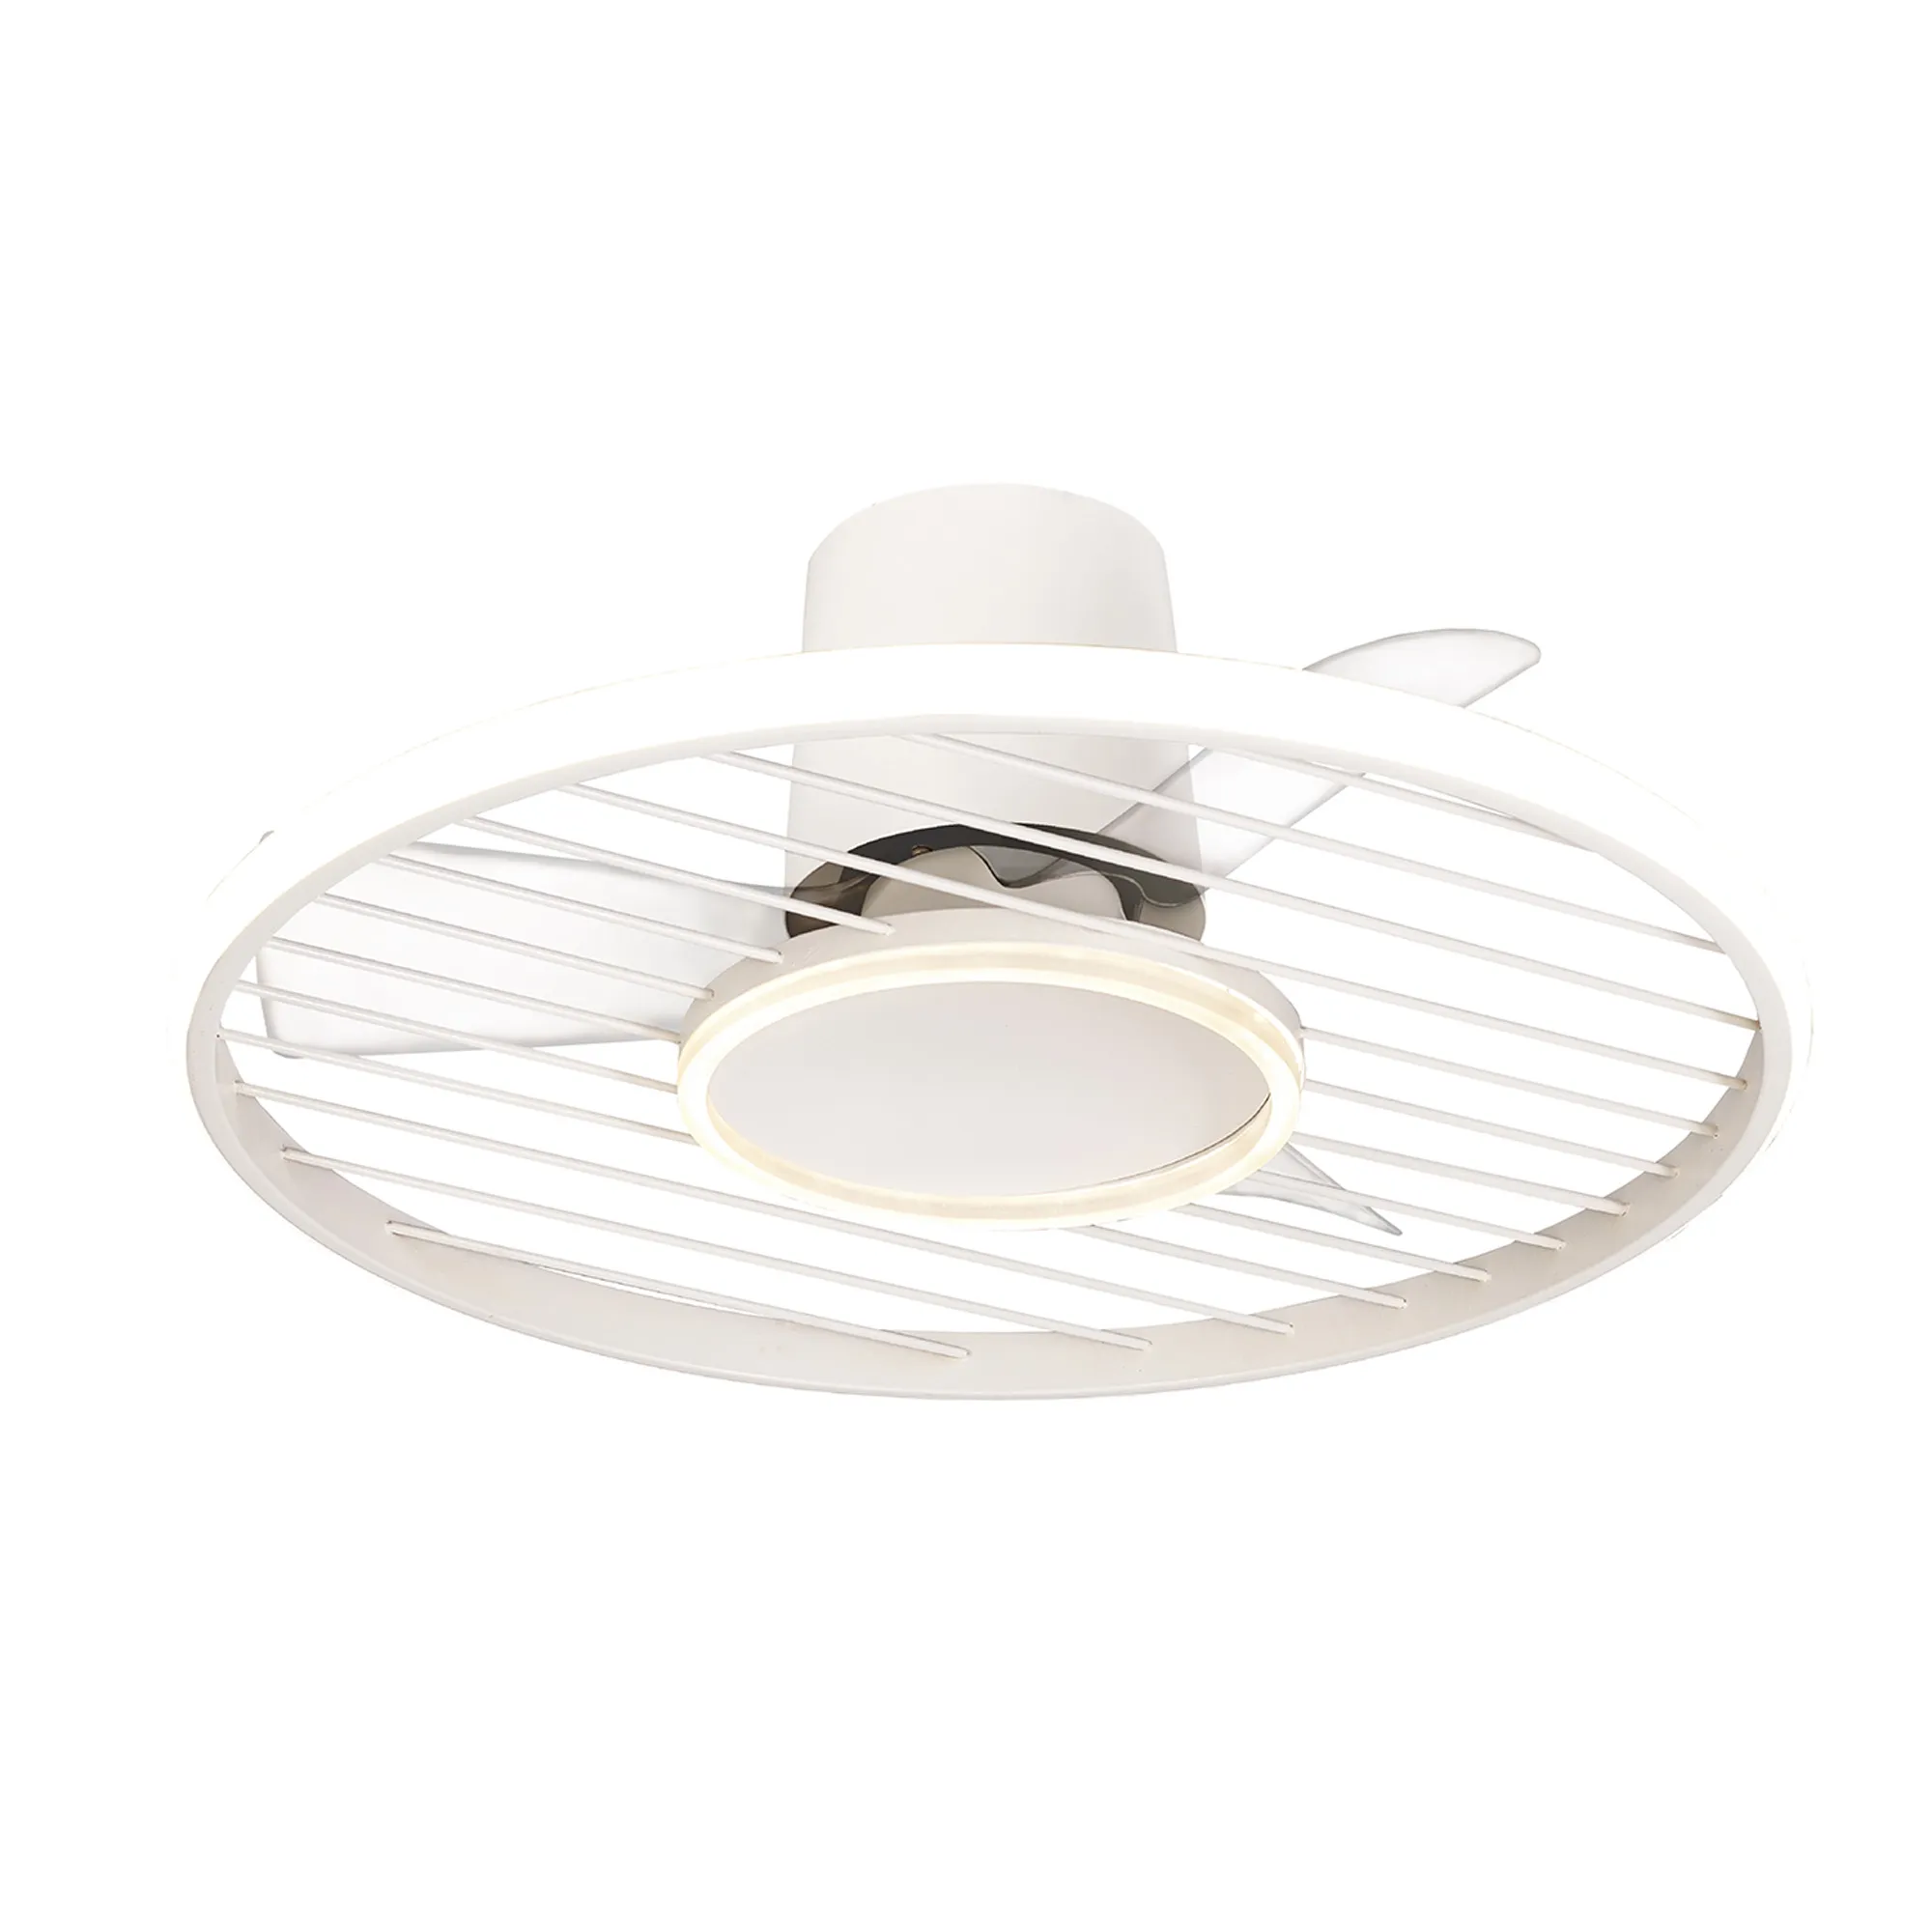 M8720  Soho 45W LED Dimmable Ceiling Light With Built-In 30W DC Fan; 2700-5000K Remote & APP Control; White